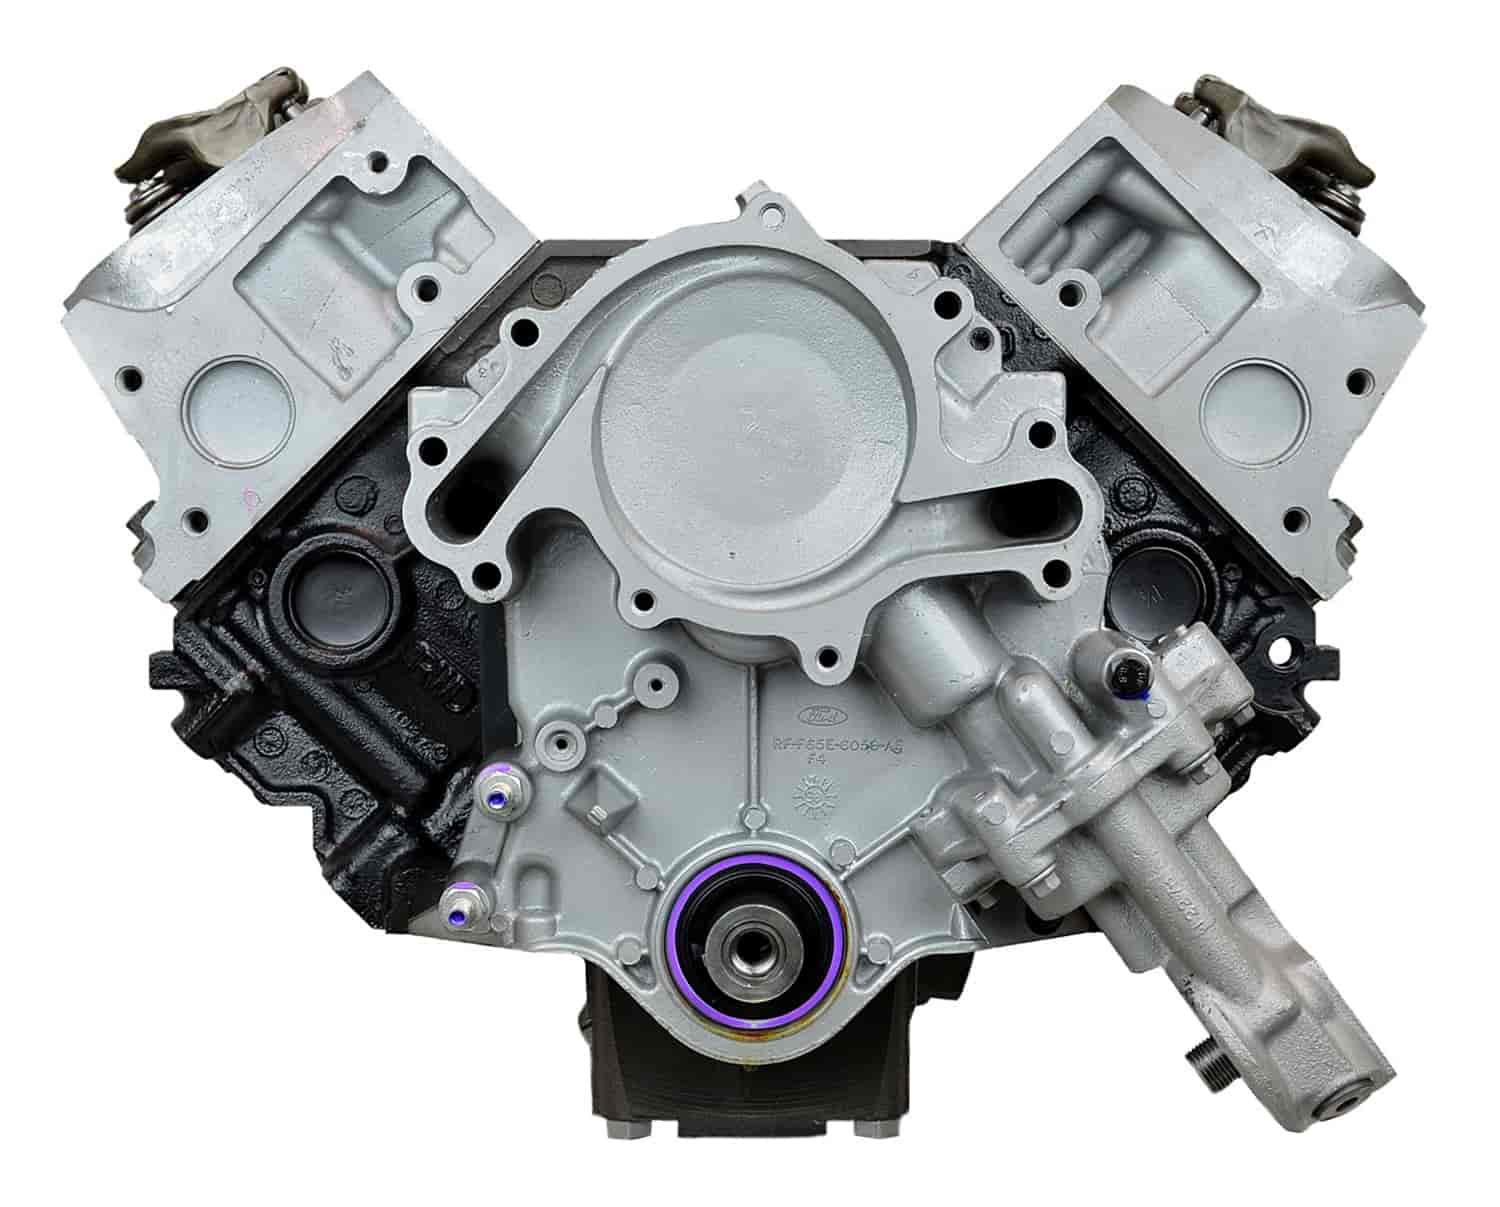 Remanufactured Crate Engine for 2001-2008 Ford F-Series Truck